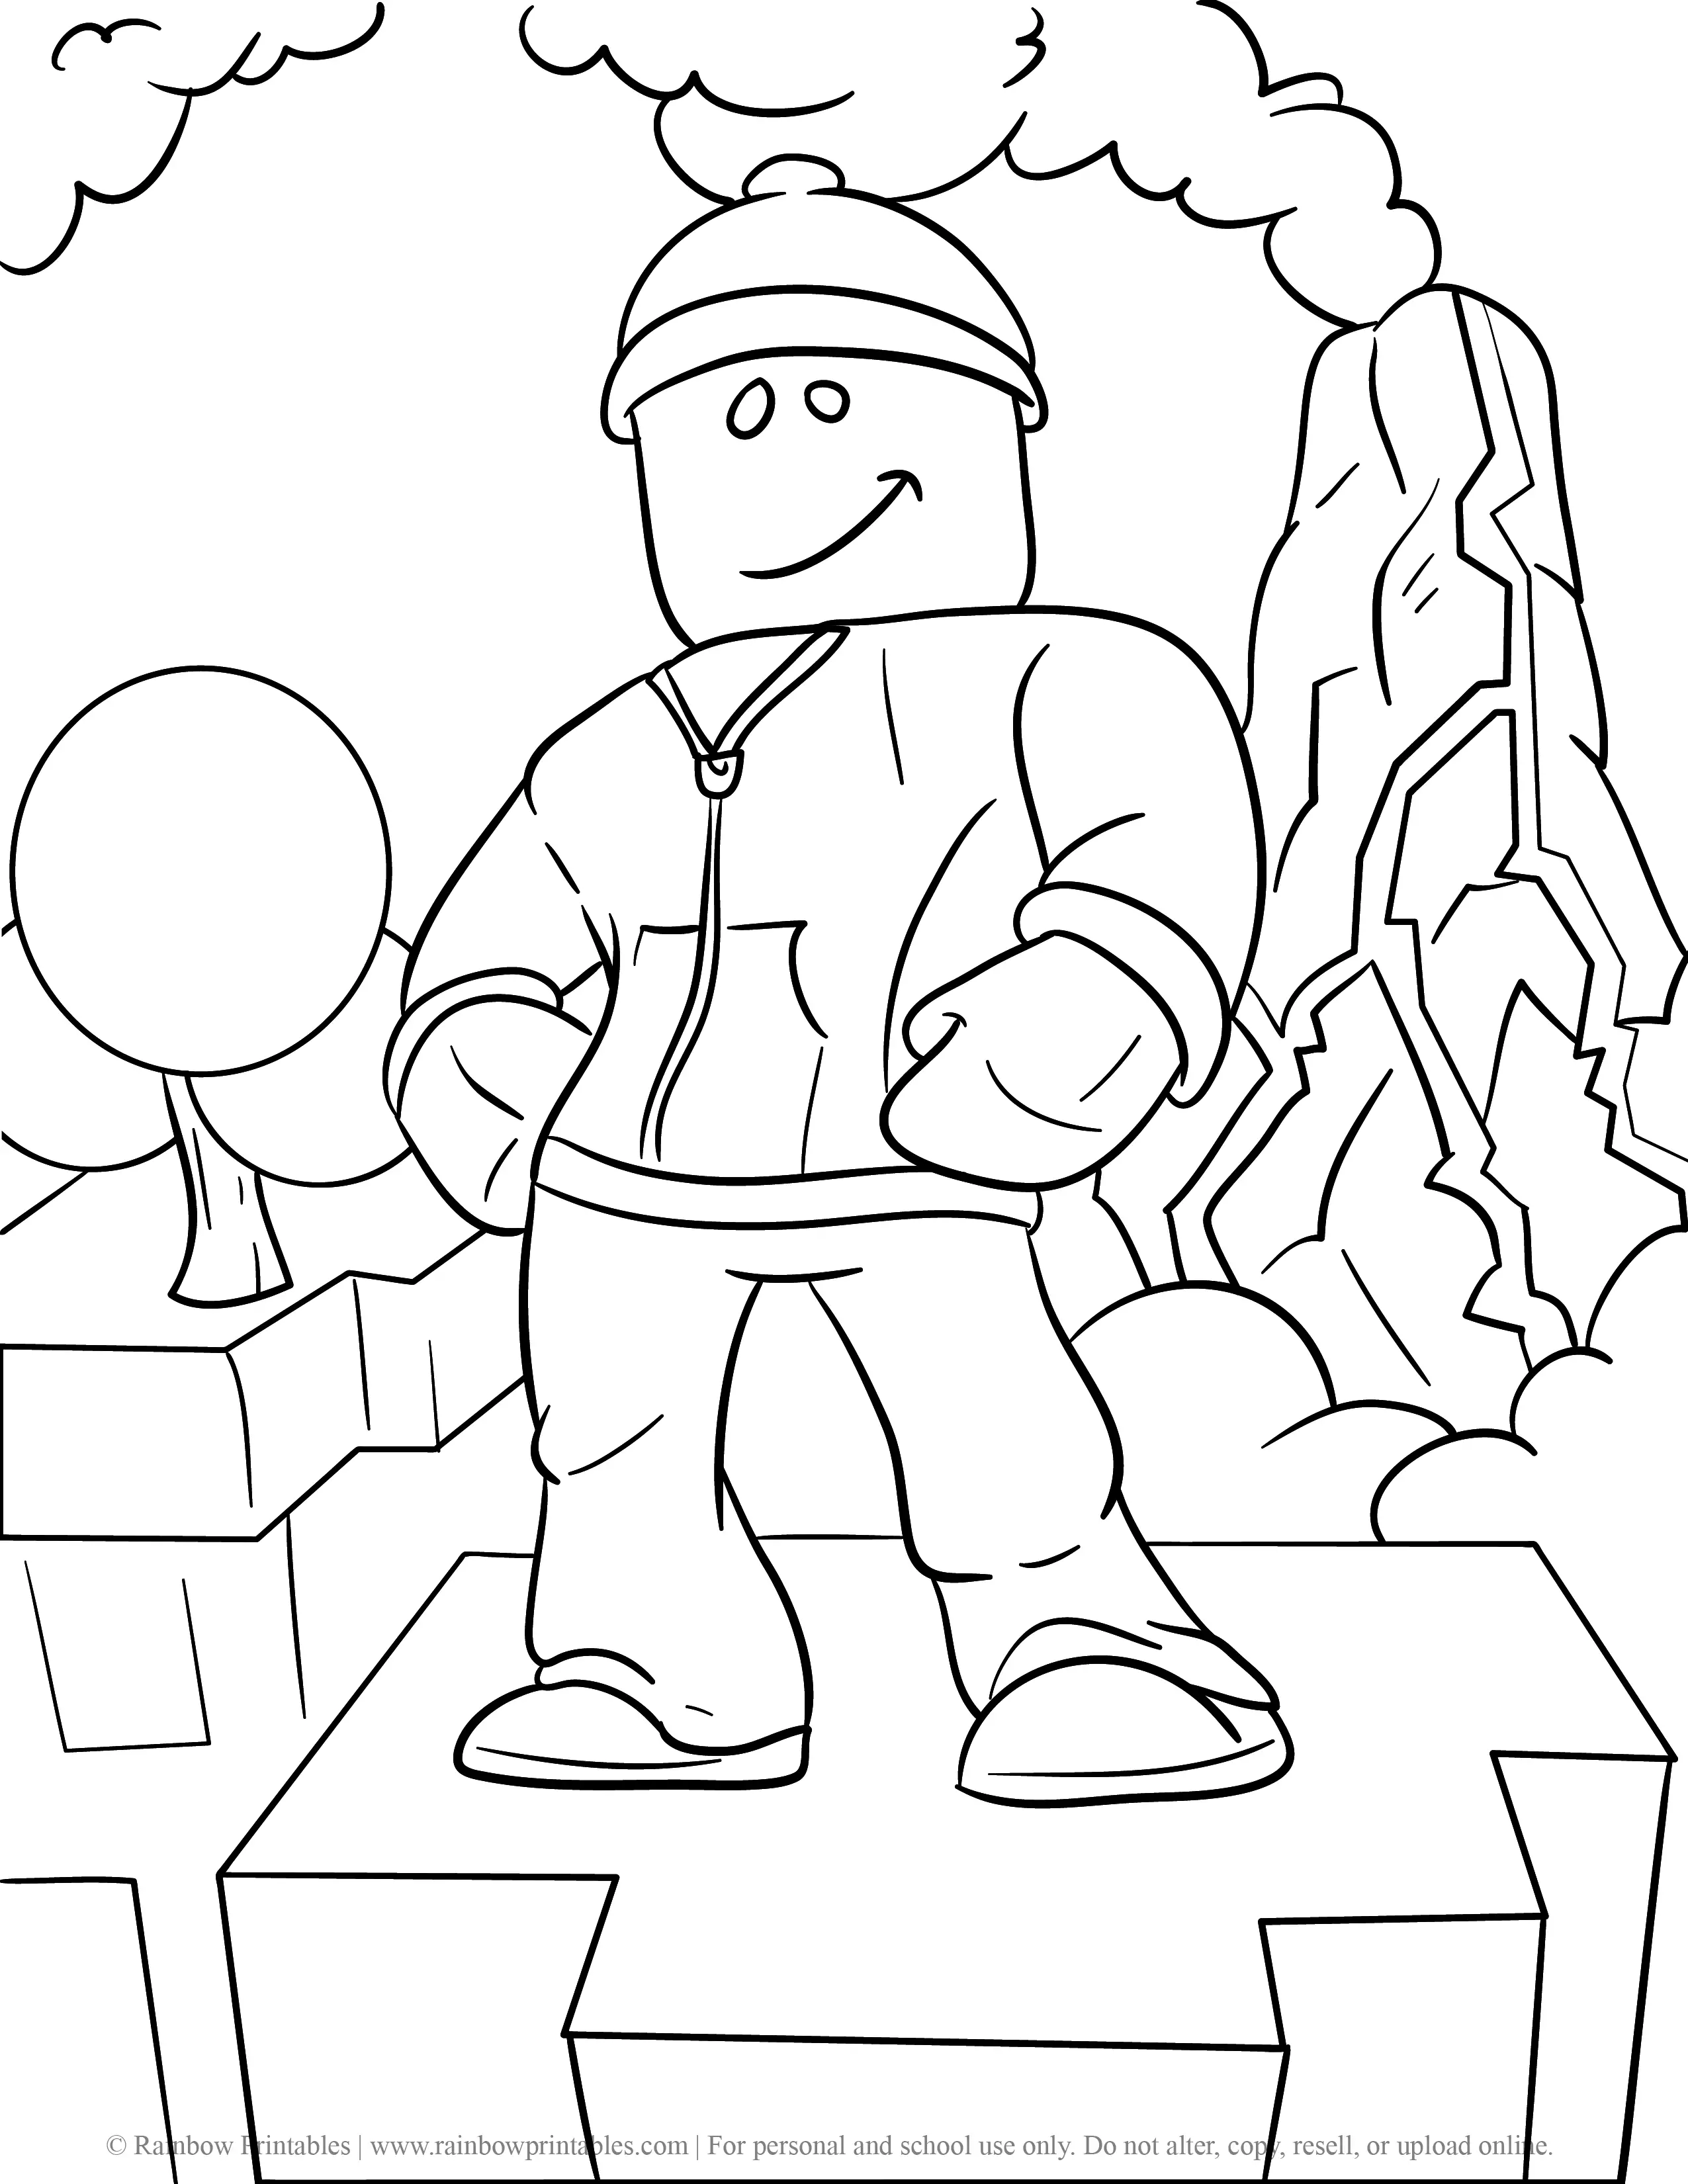 Free Media (TV Shows, Movies, Video Games) Coloring Pages